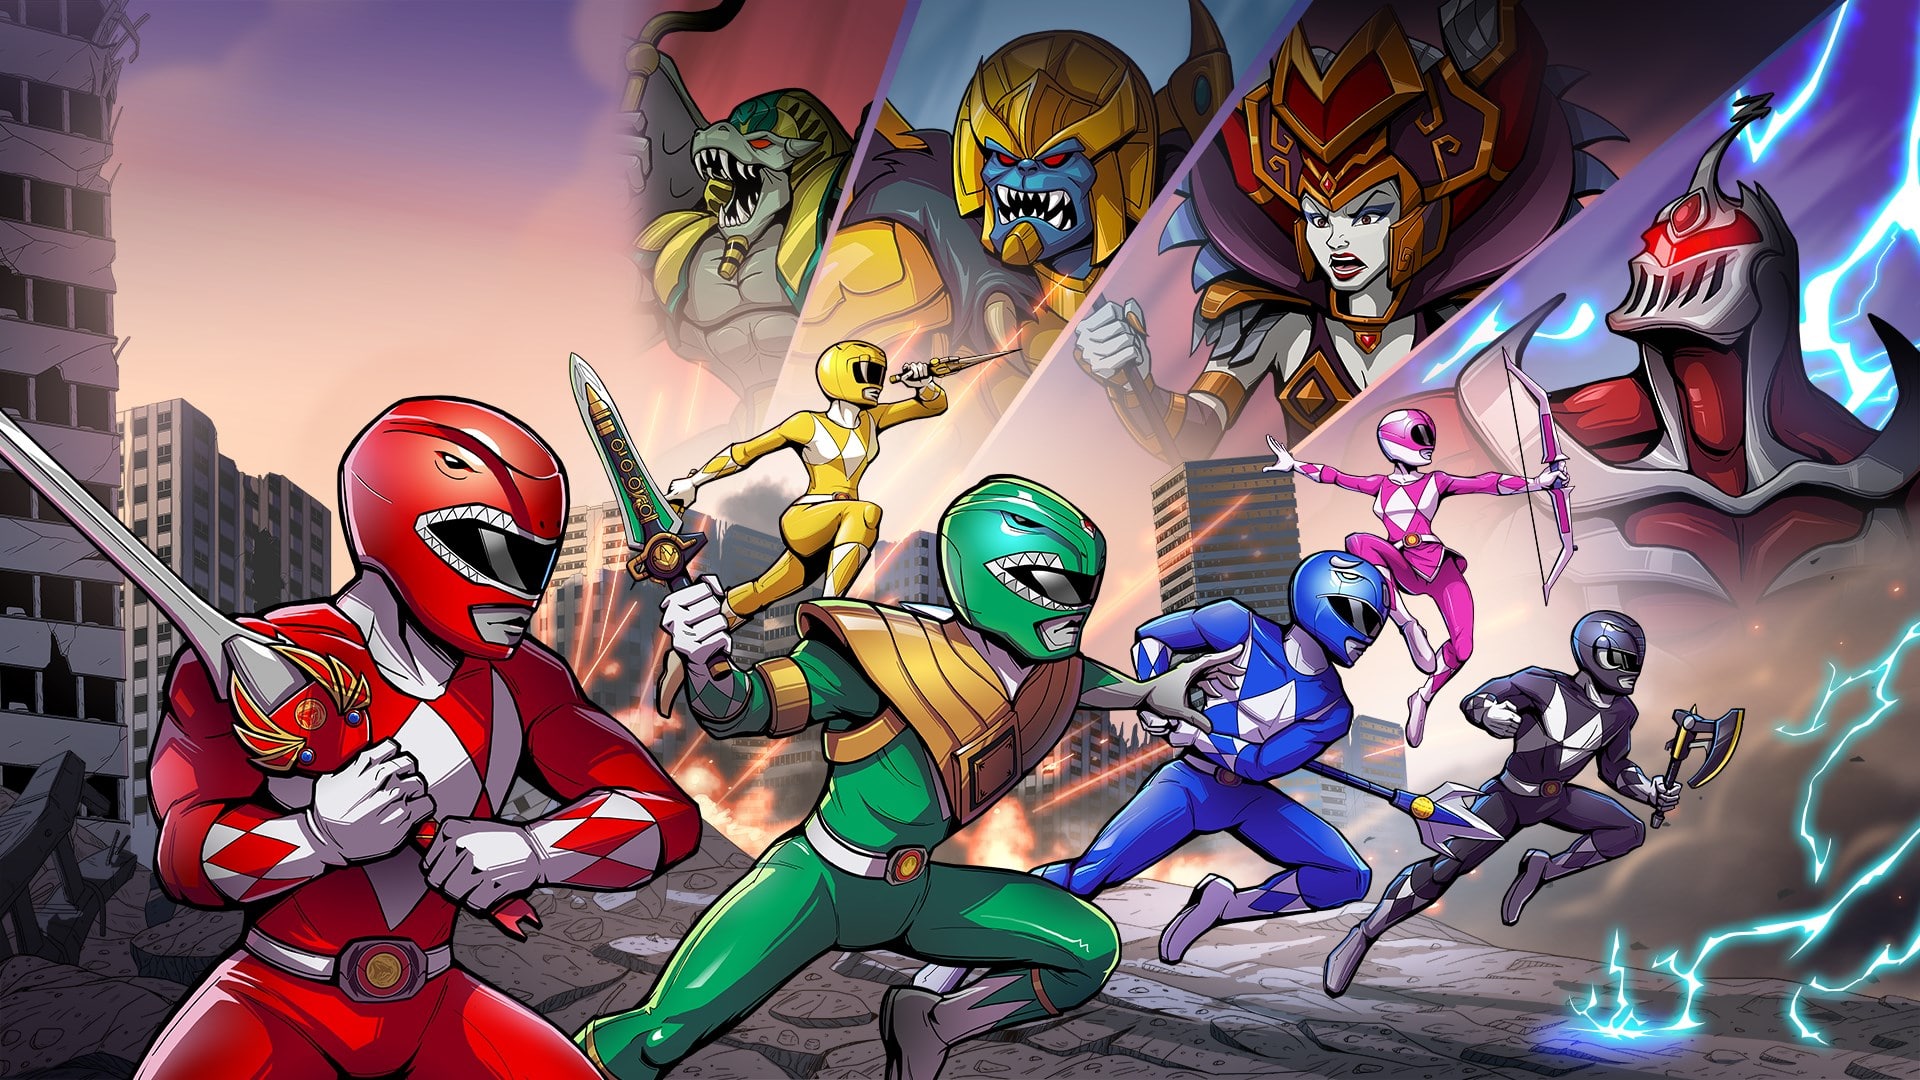  Bad news for Power Rangers fans   Anime News India  Facebook